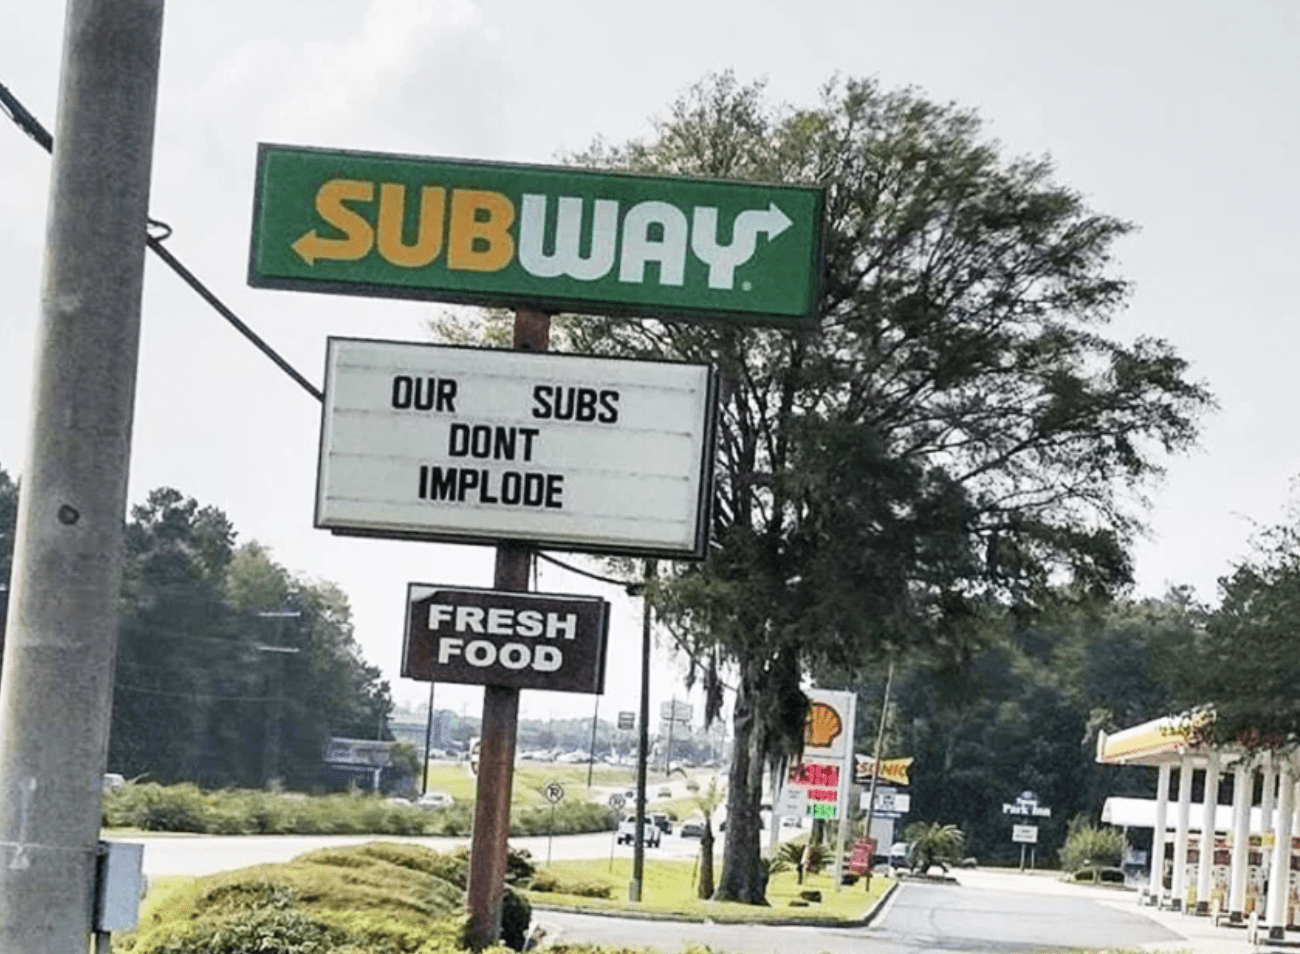 This Subway sign was taken down after backlash. Courtesy Timothy Mauck